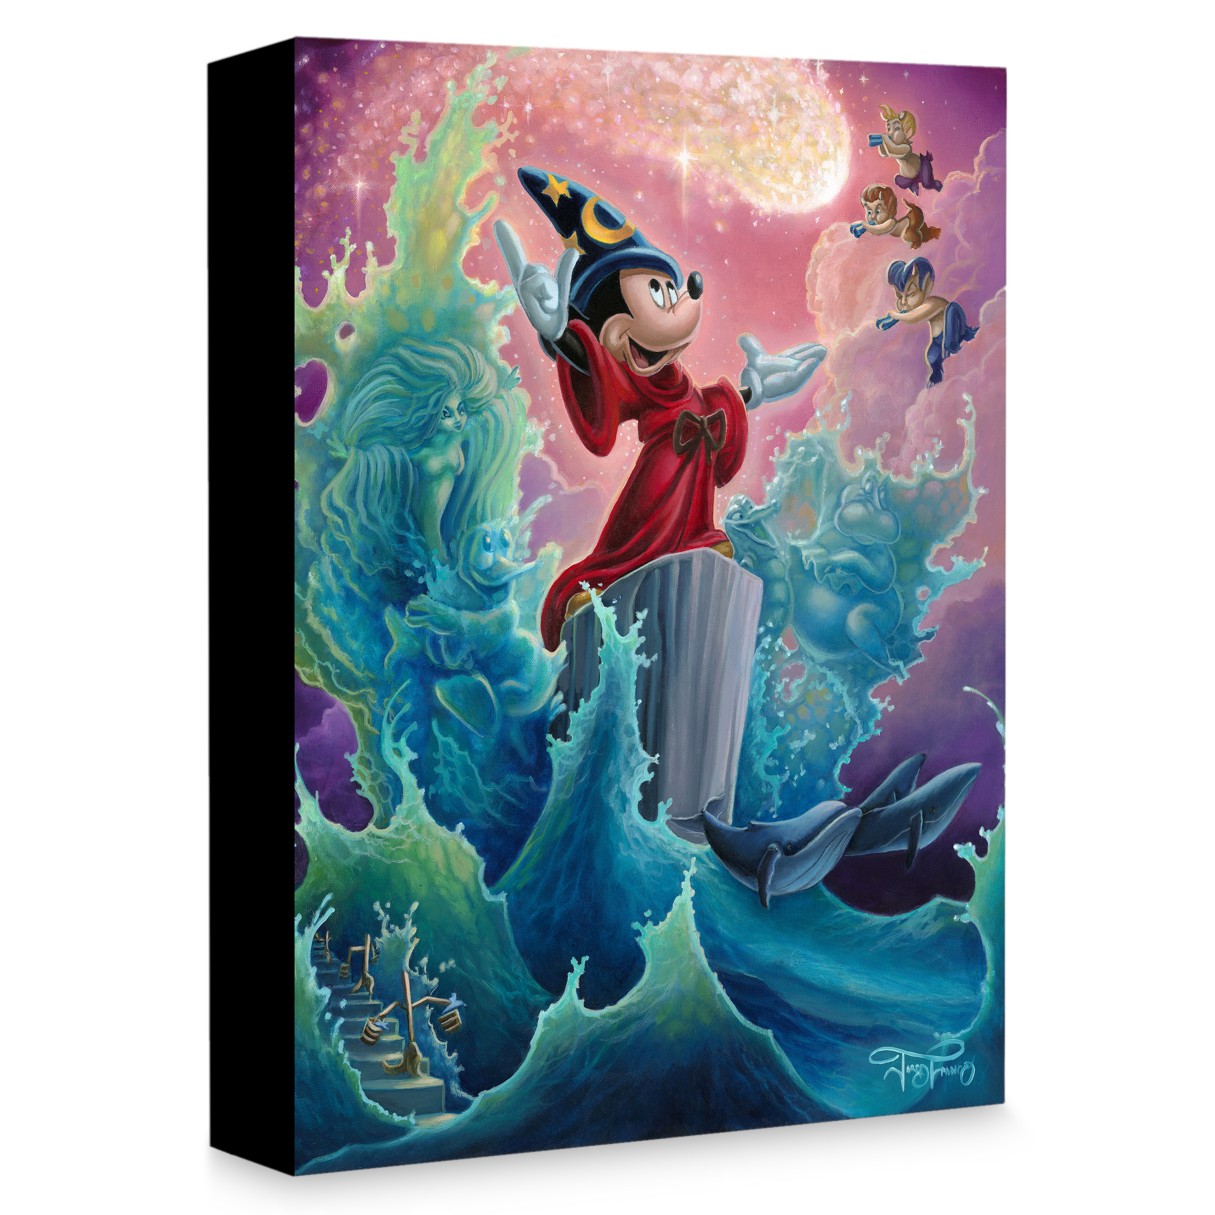 Sorcerer Mickey Mouse ''The Sorcerer's Finale'' Giclée on Canvas by Jared Franco